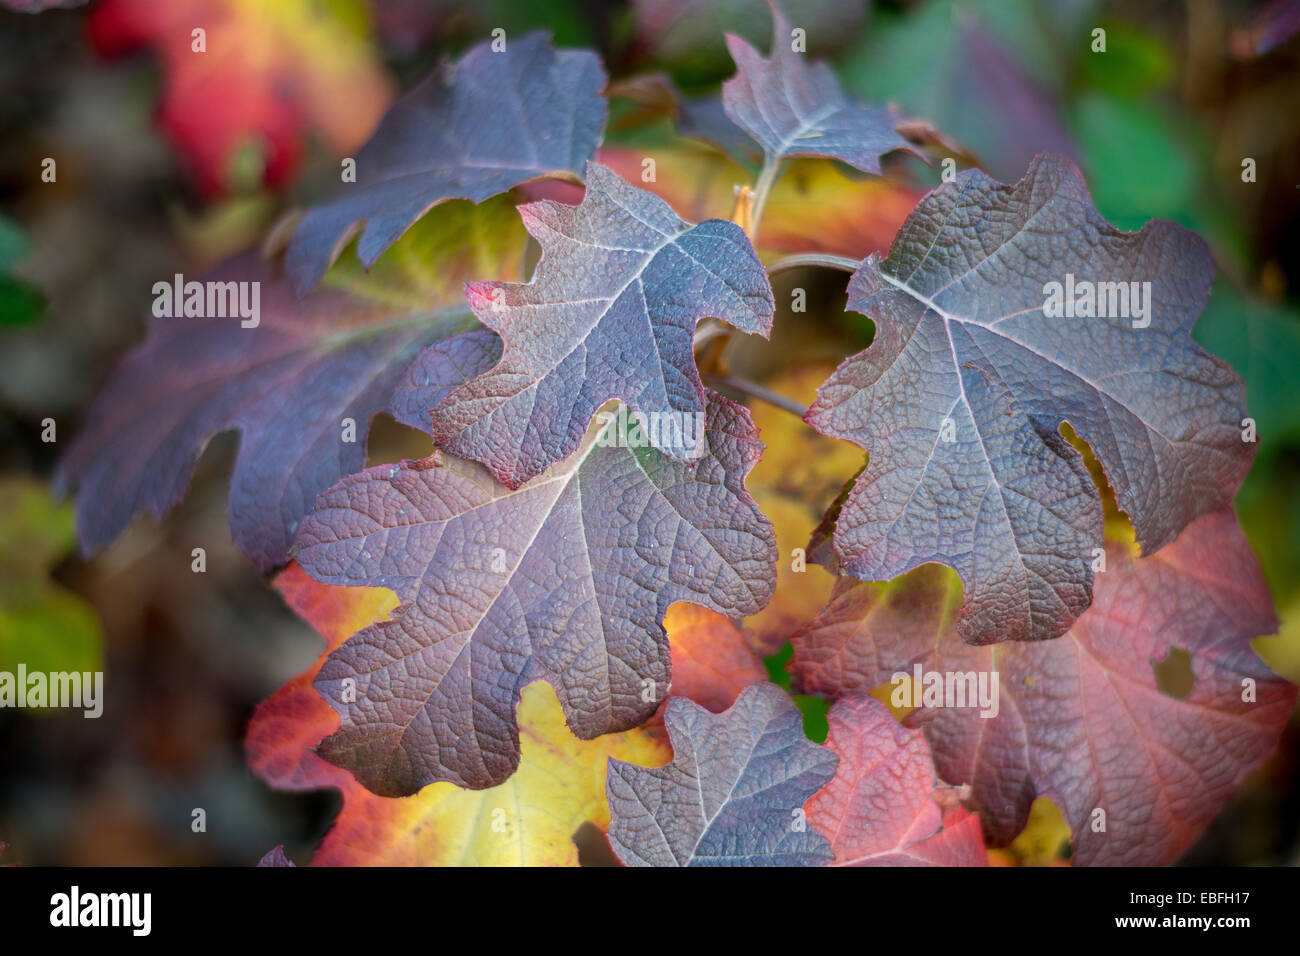 Hydrangea quercifolia red,purple and yellow autumn leaves Stock Photo